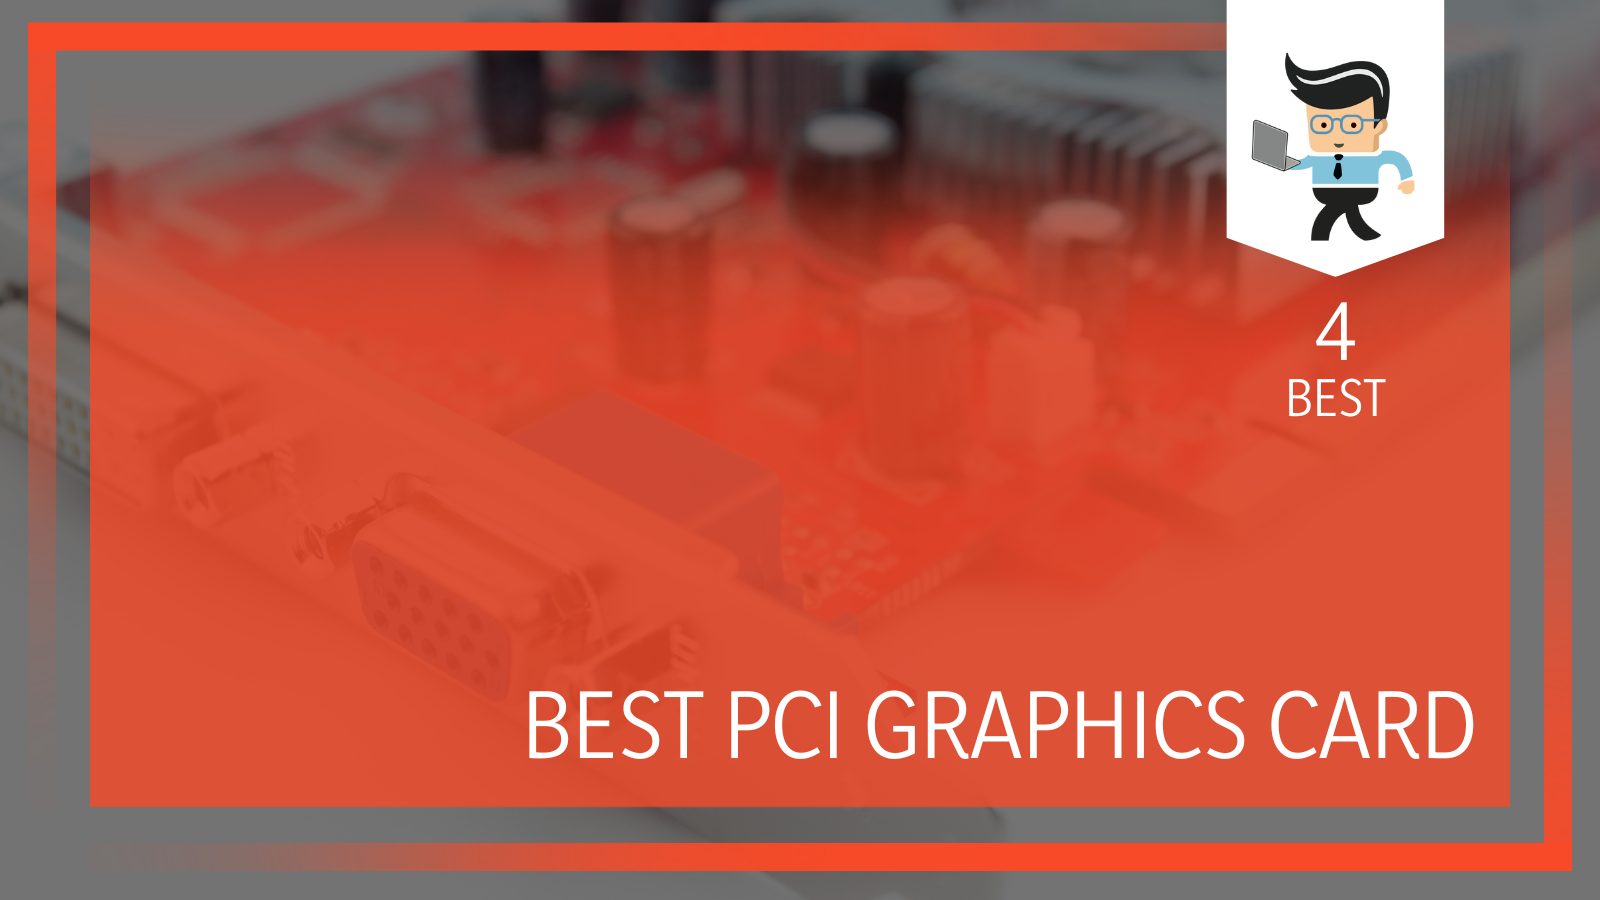 What is Best Pci Graphics Card